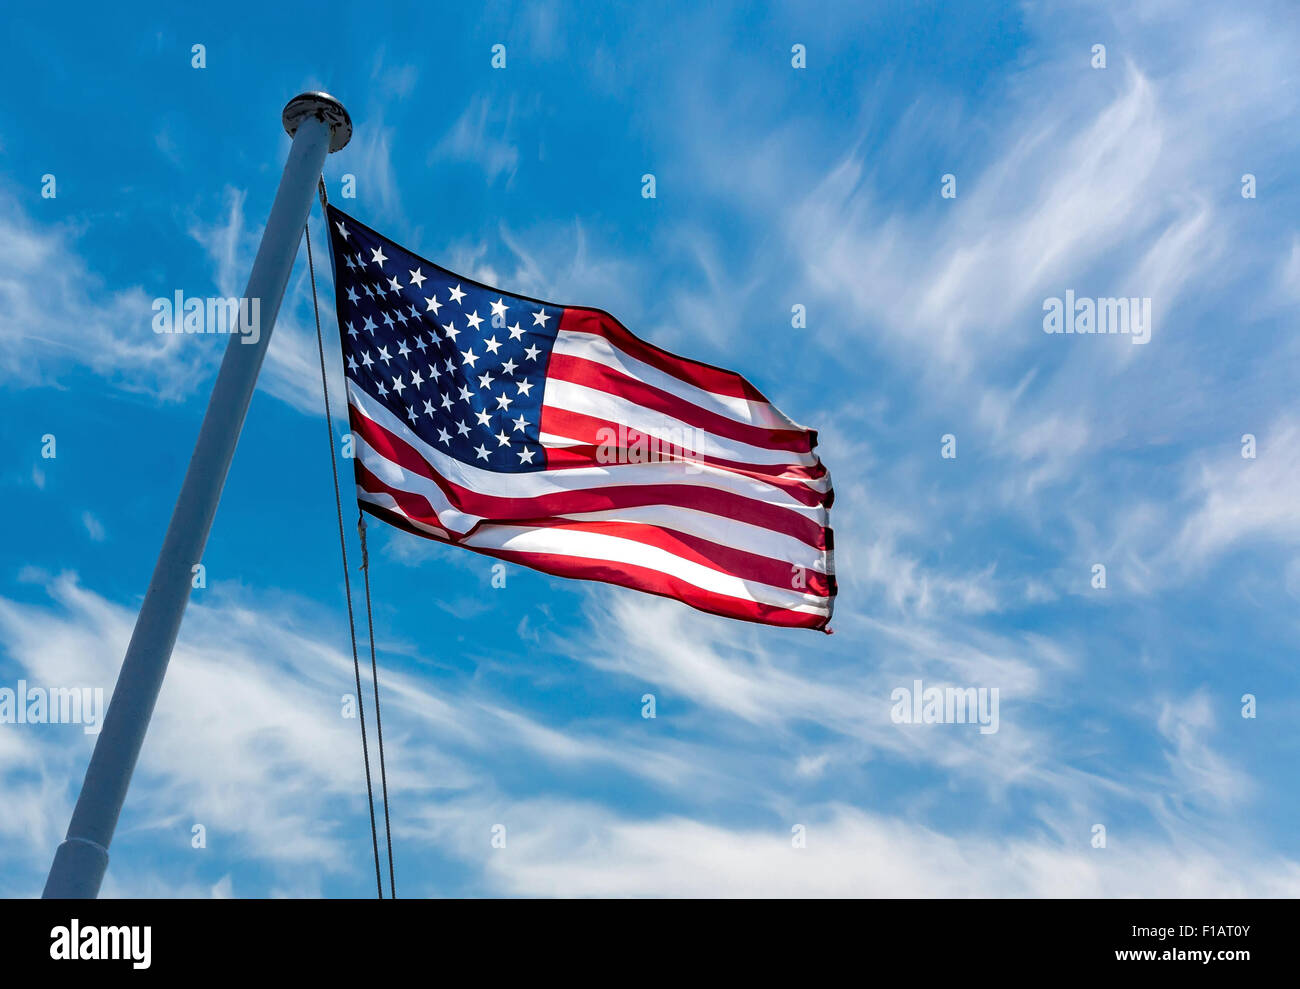 American flag flying against a blue sky. Stock Photo